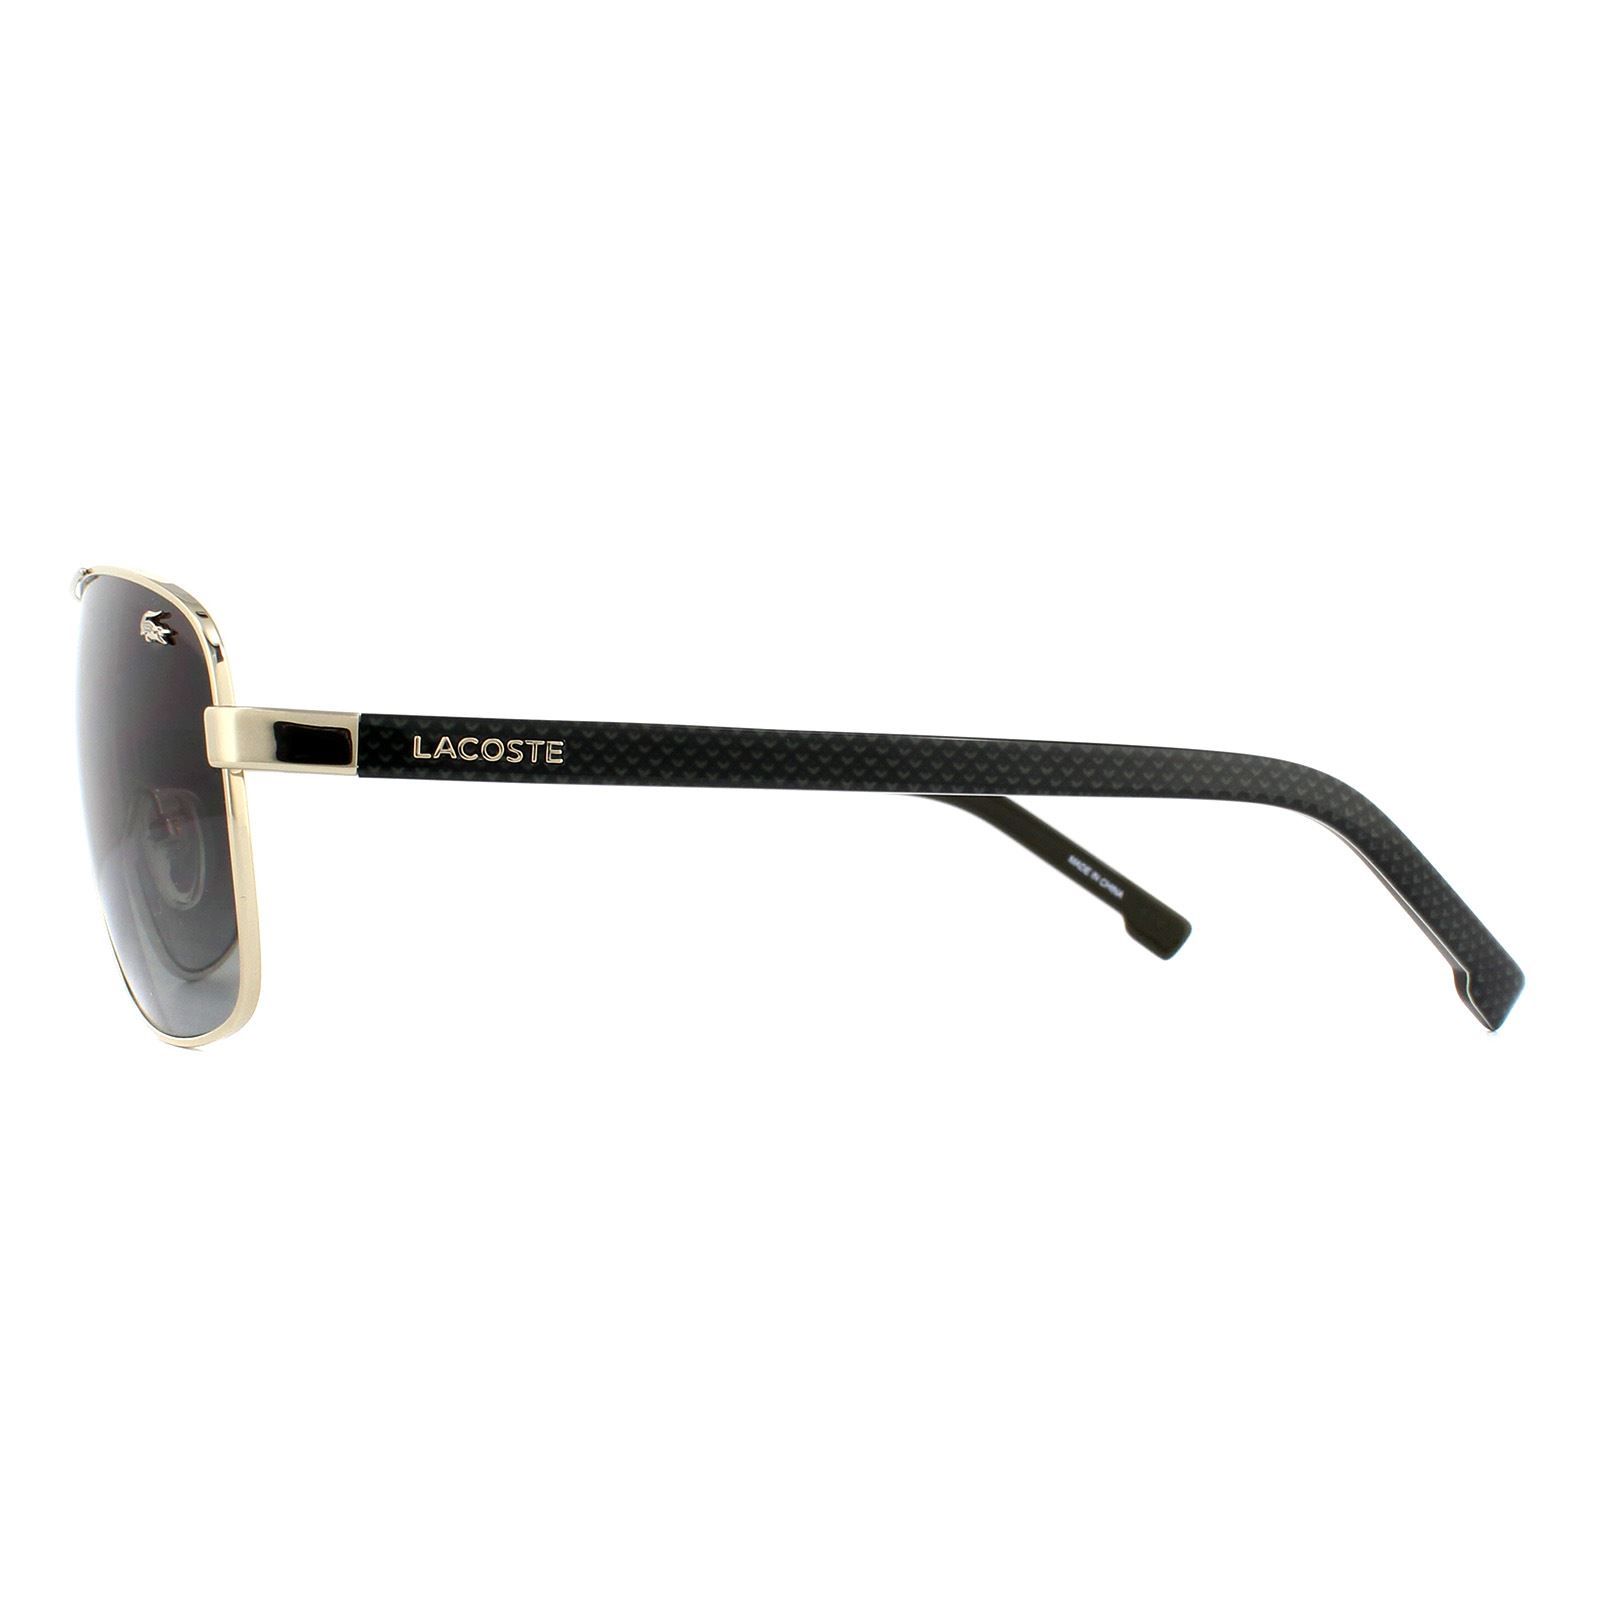 Lacoste Sunglasses L162S 714 Gold Brown Gradient are a large square aviator style for men with a metal frame front and plastic temples for added comfort. The iconic Lacoste alligator embellishes one lens corner, and the Lacoste text logo is also featured on each temple.